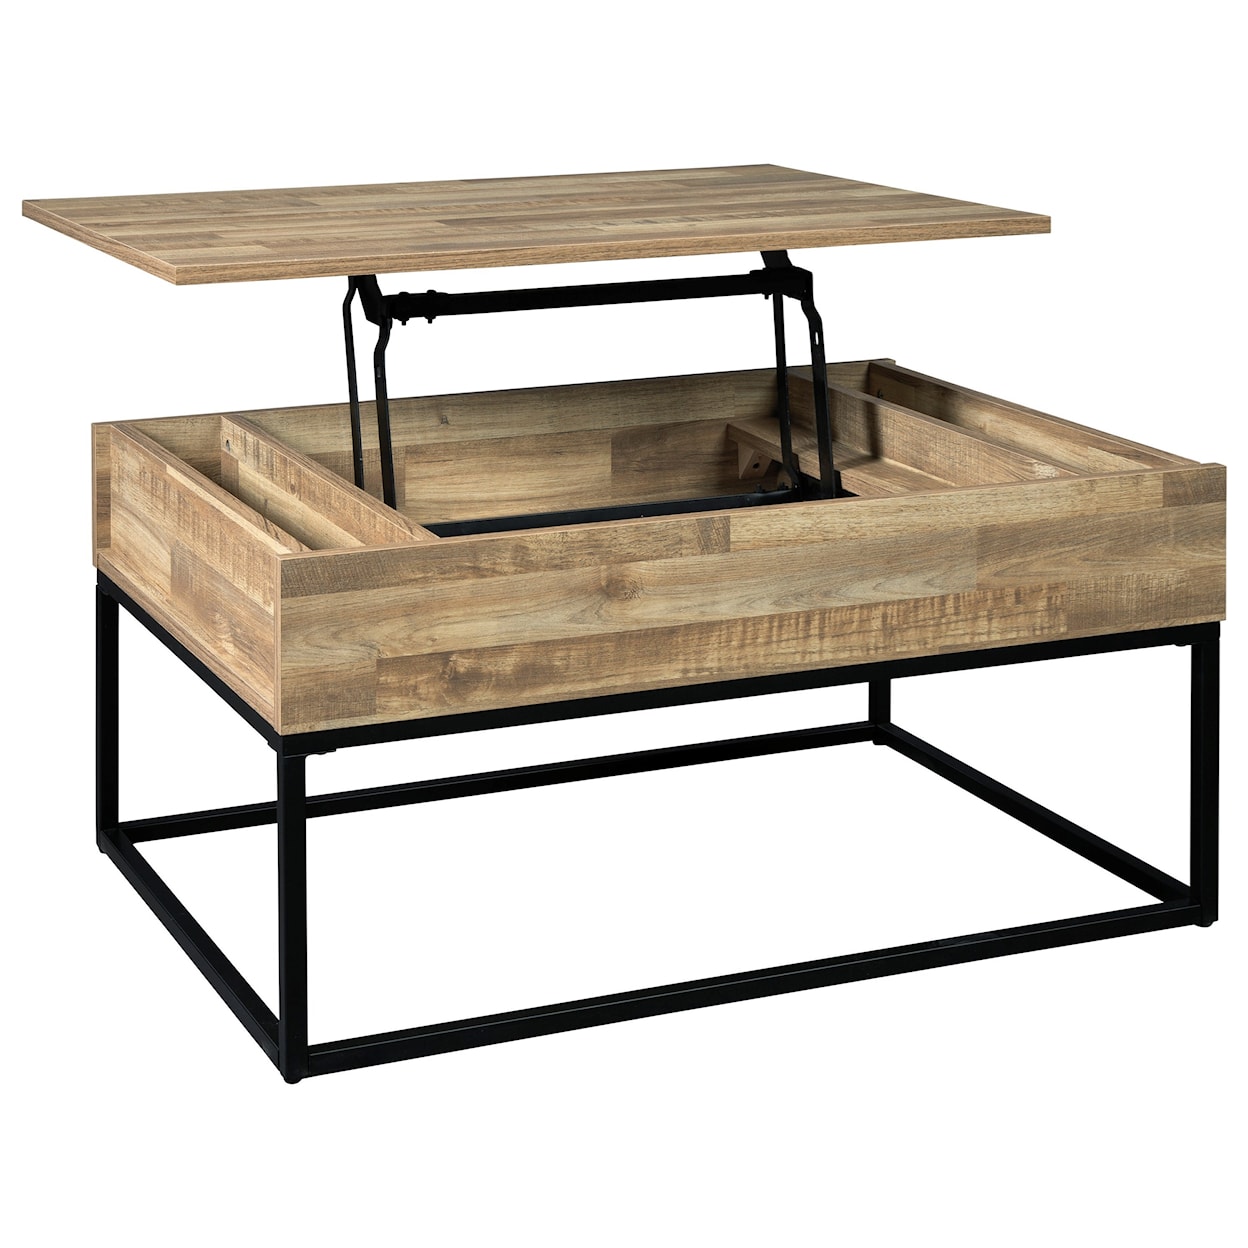 Signature Design by Ashley Furniture Gerdanet Lift Top Cocktail Table